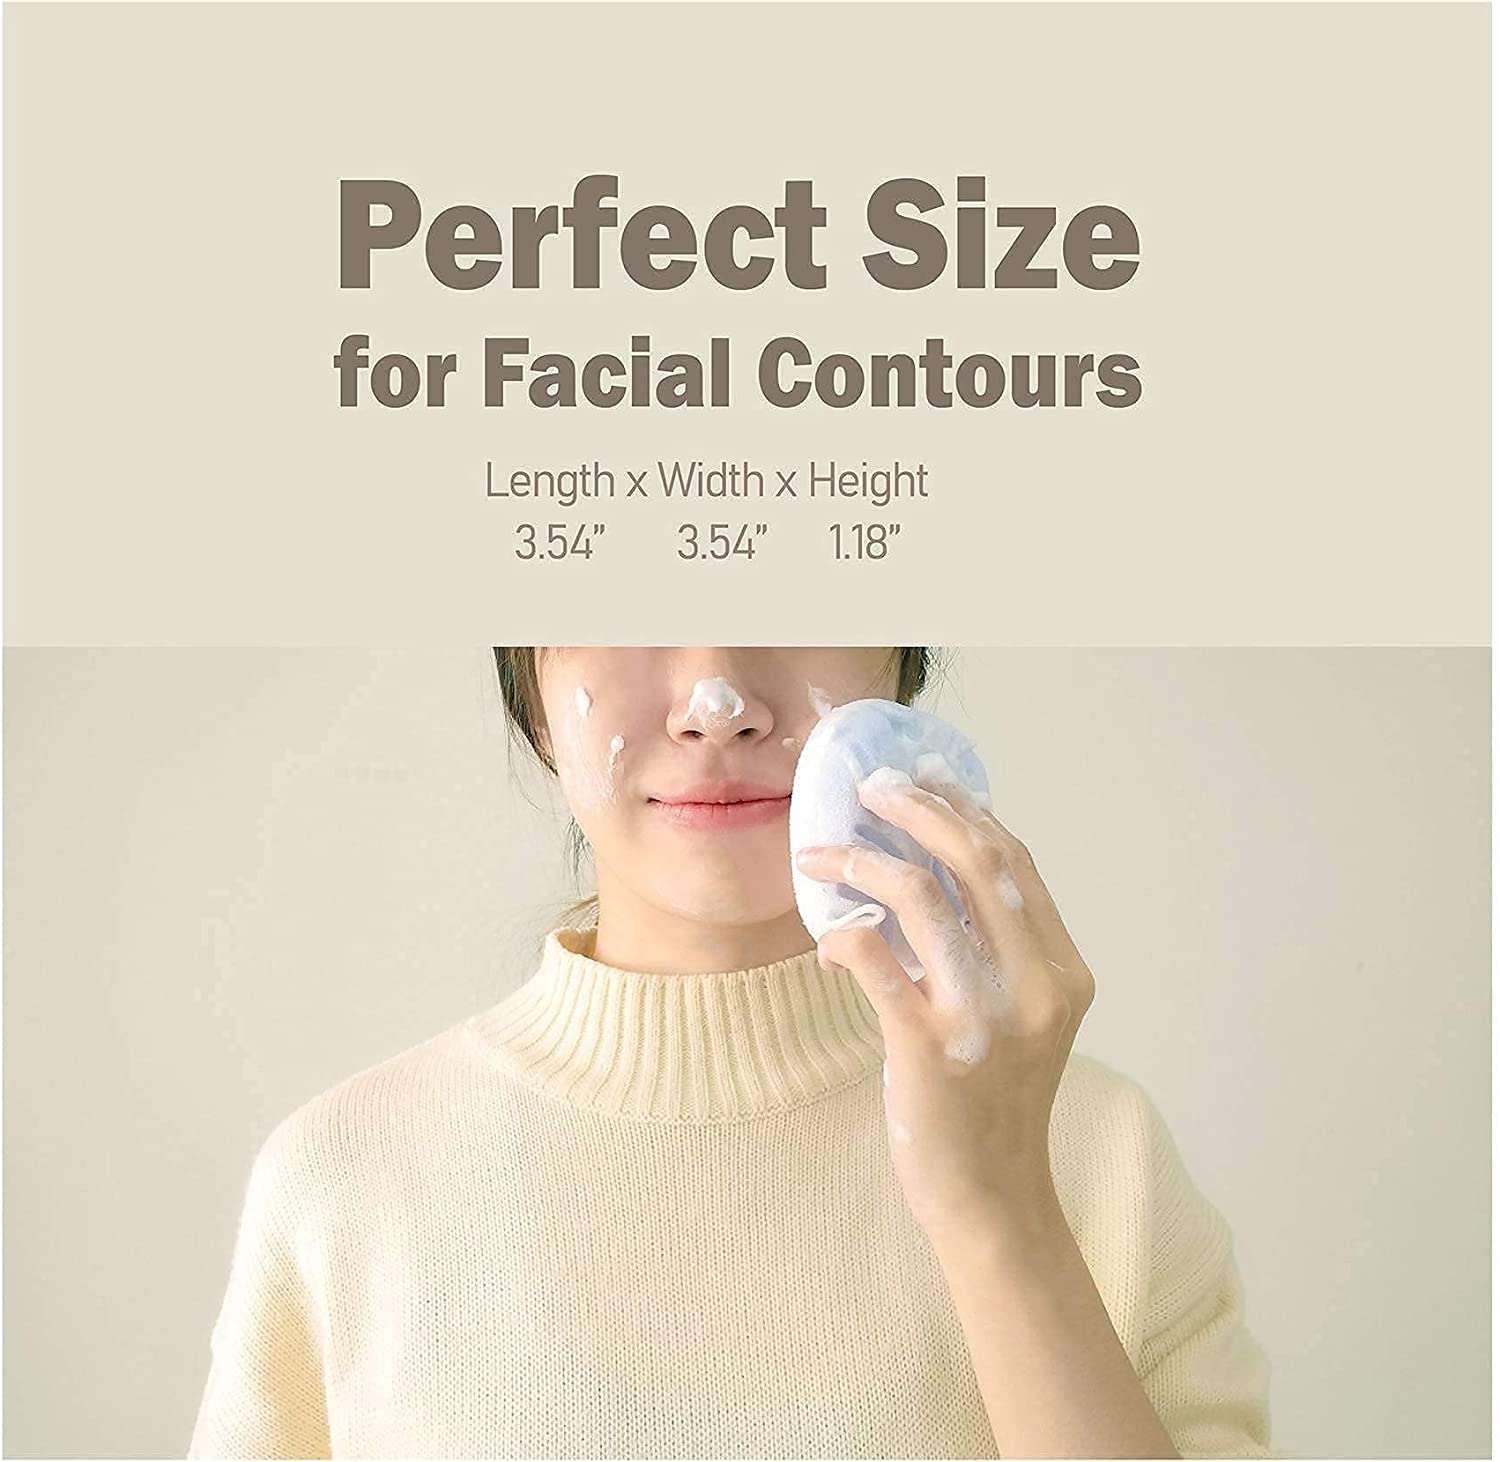 myHomeBody Dual-Texture Facial Sponges